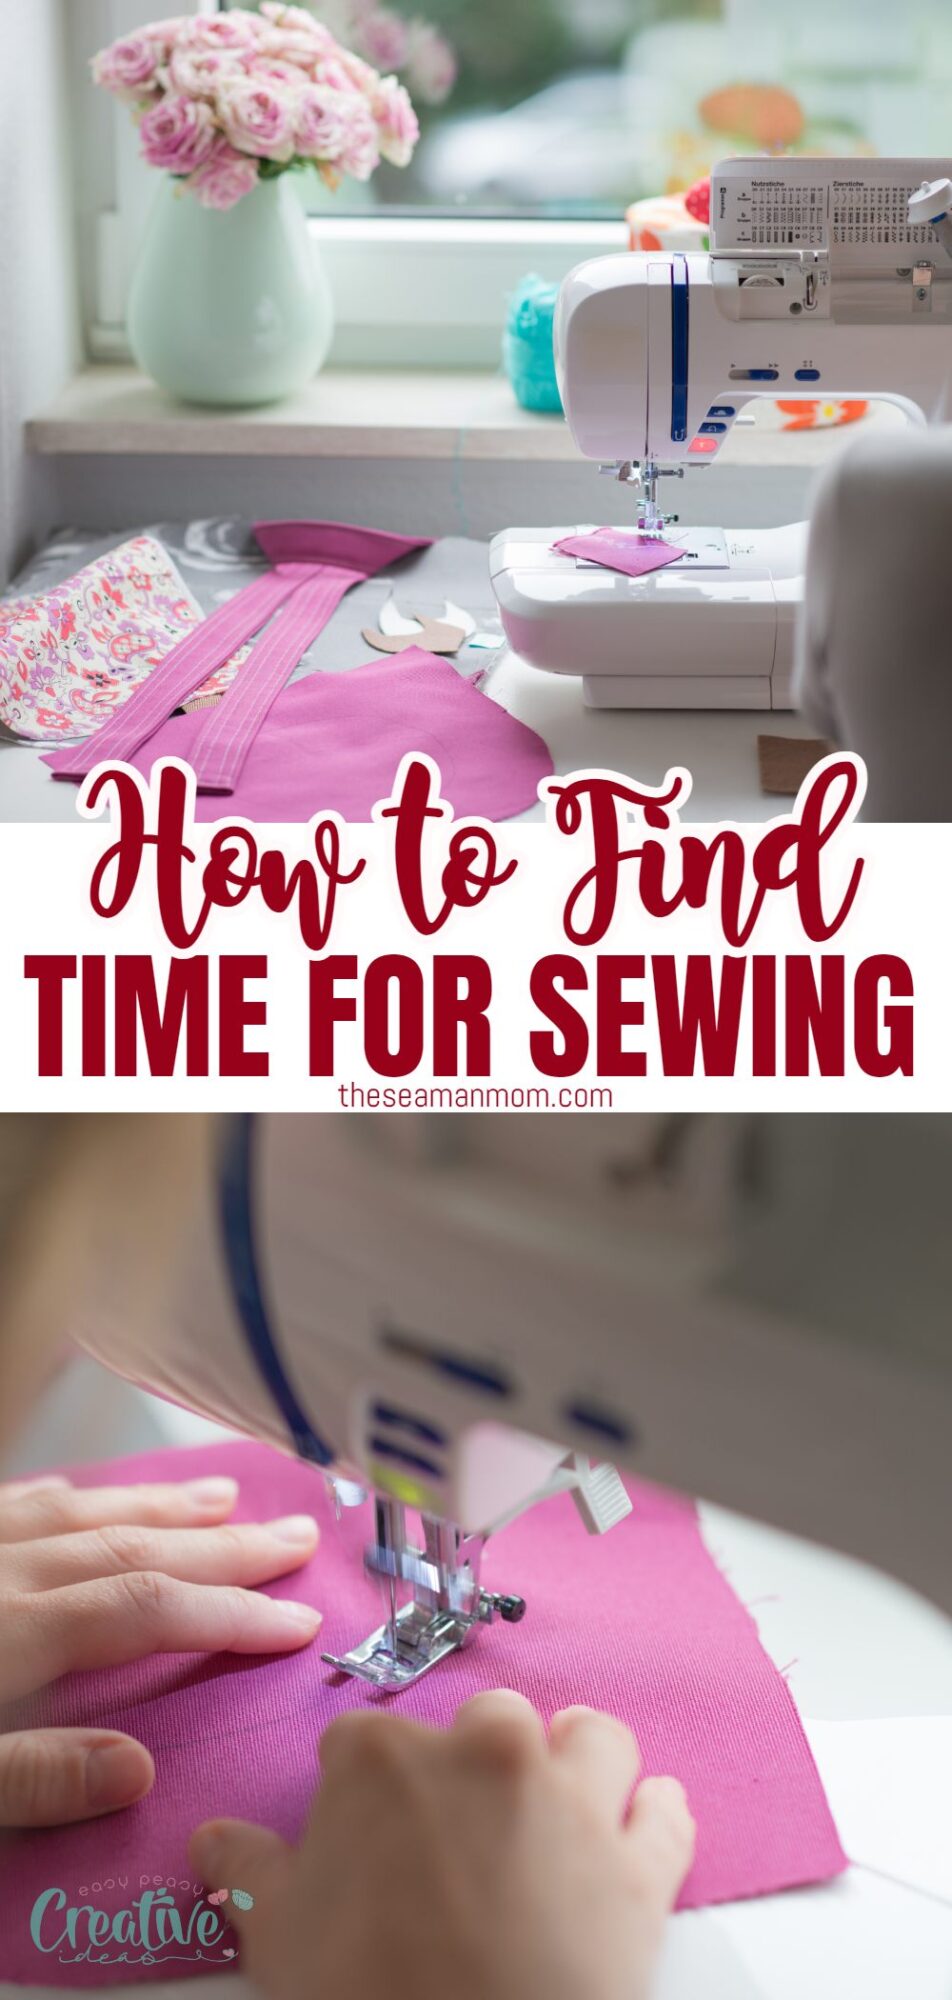 Discover time-saving tips for sewing enthusiasts to make more time for their beloved craft, even on the busiest of days.